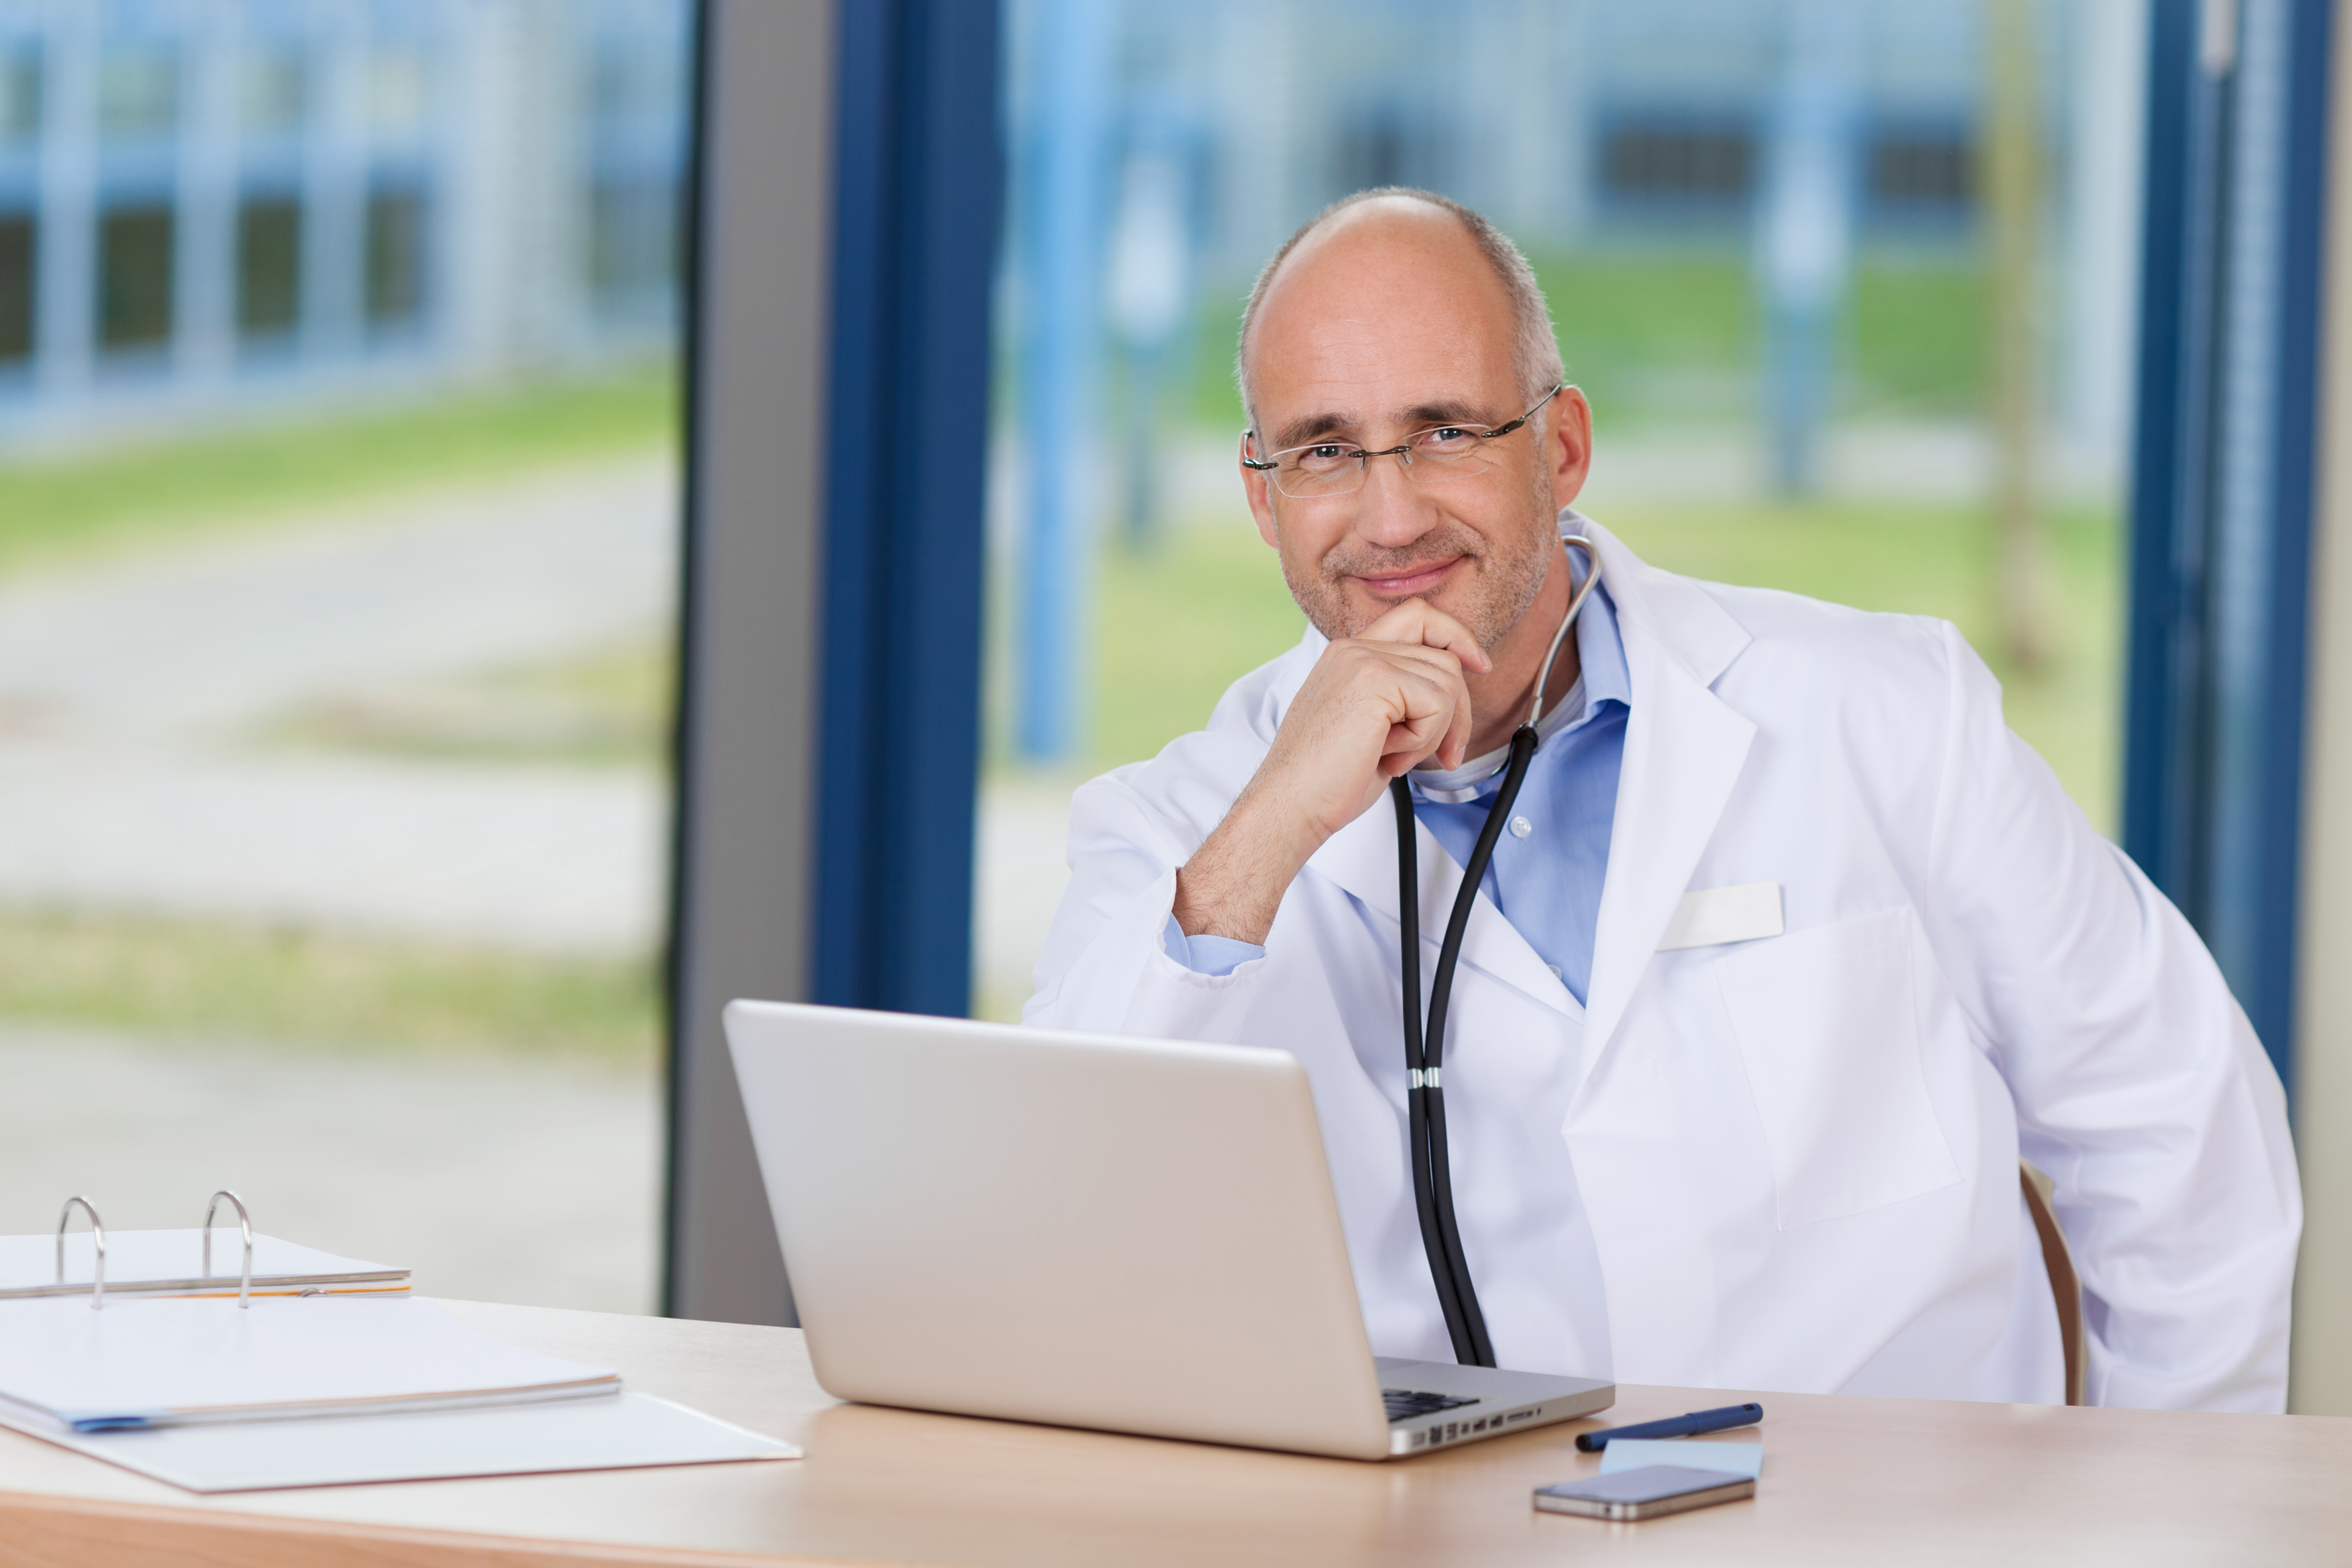 Male Doctor With Hand On Chin And Laptop On Desk